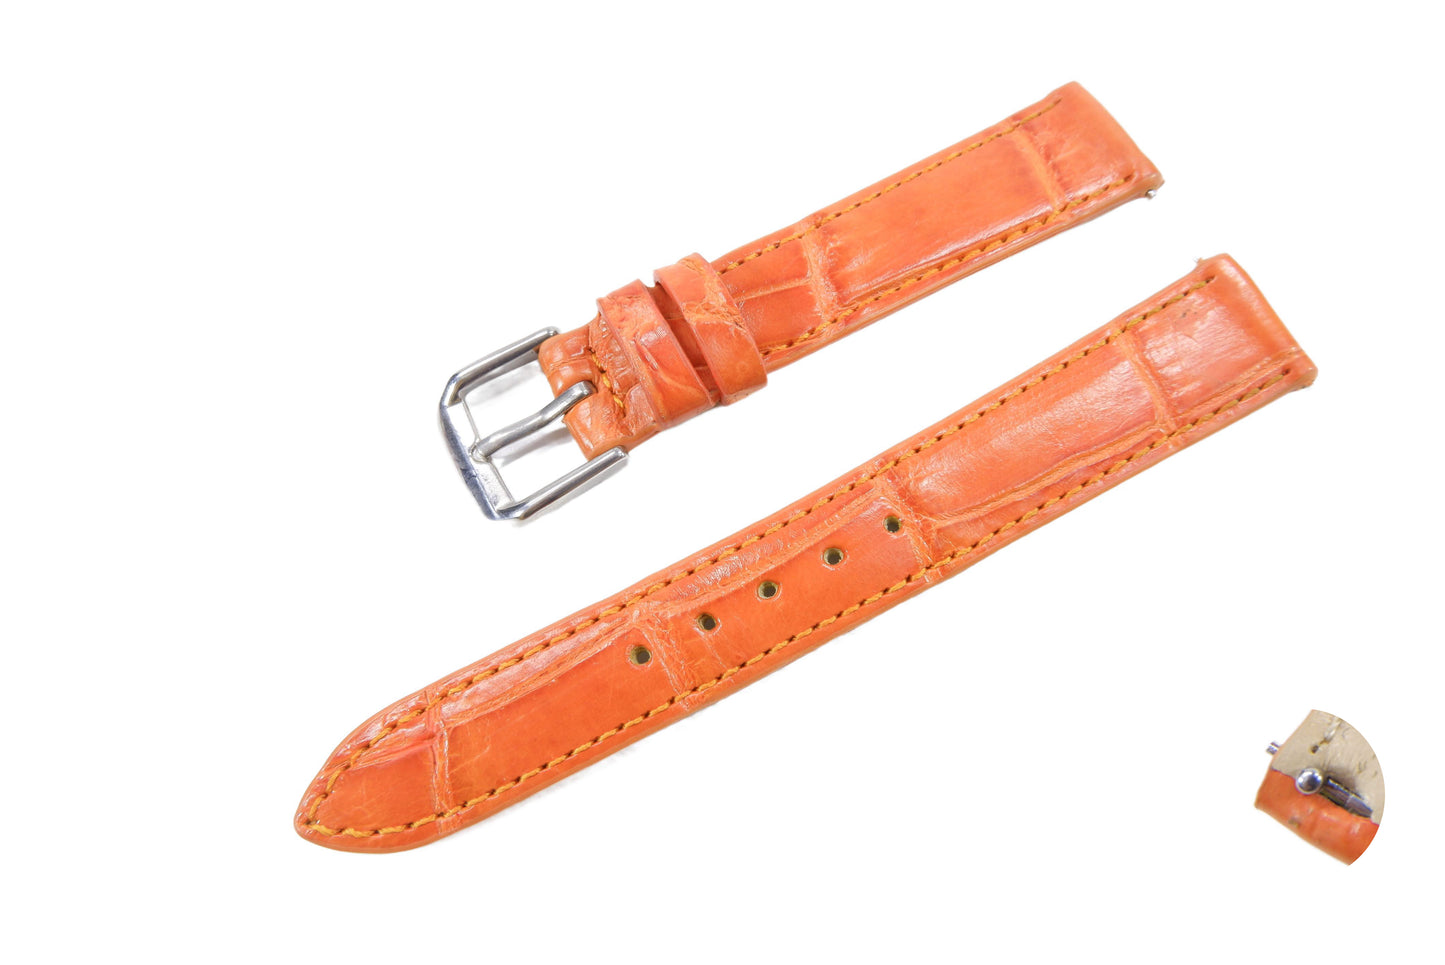 Genuine Crocodile Belly Skin Leather Quick Release Watch Strap Orange Band with Buckle